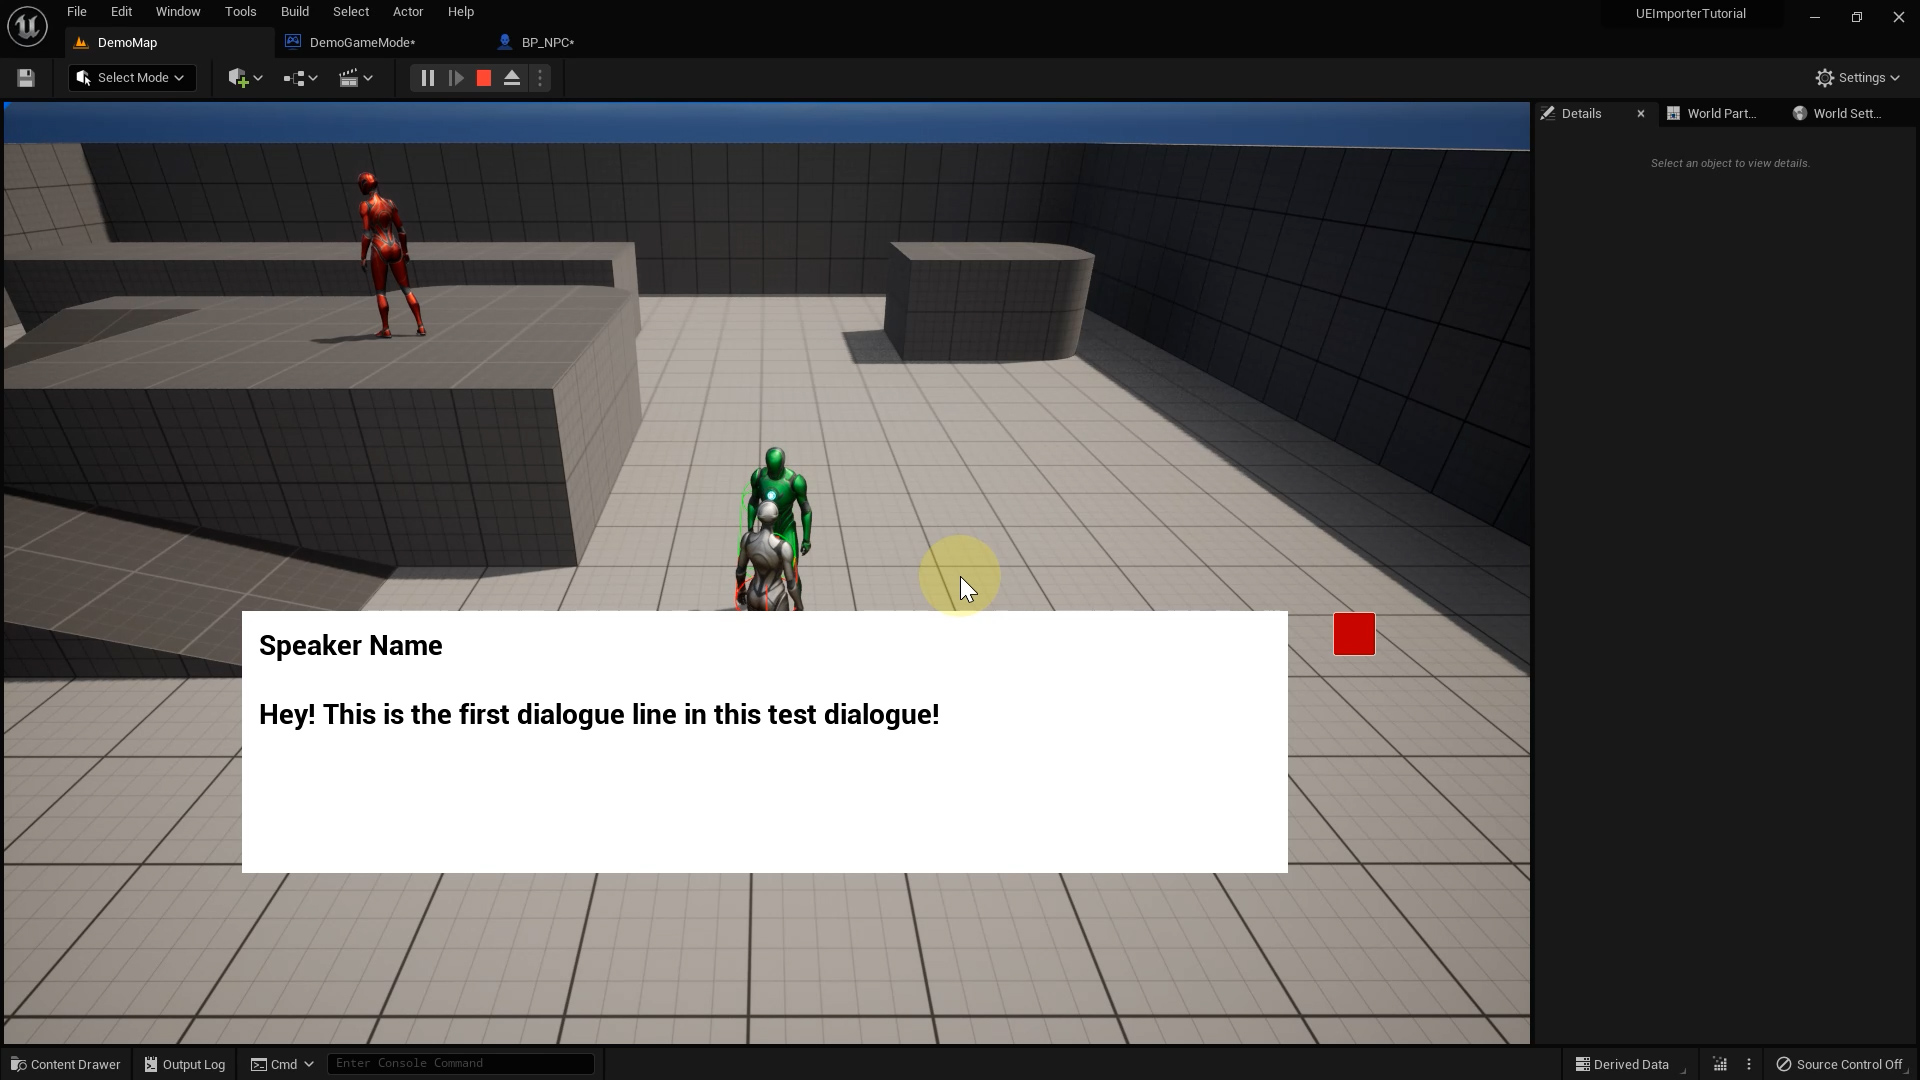 First dialogue line displayed in UI